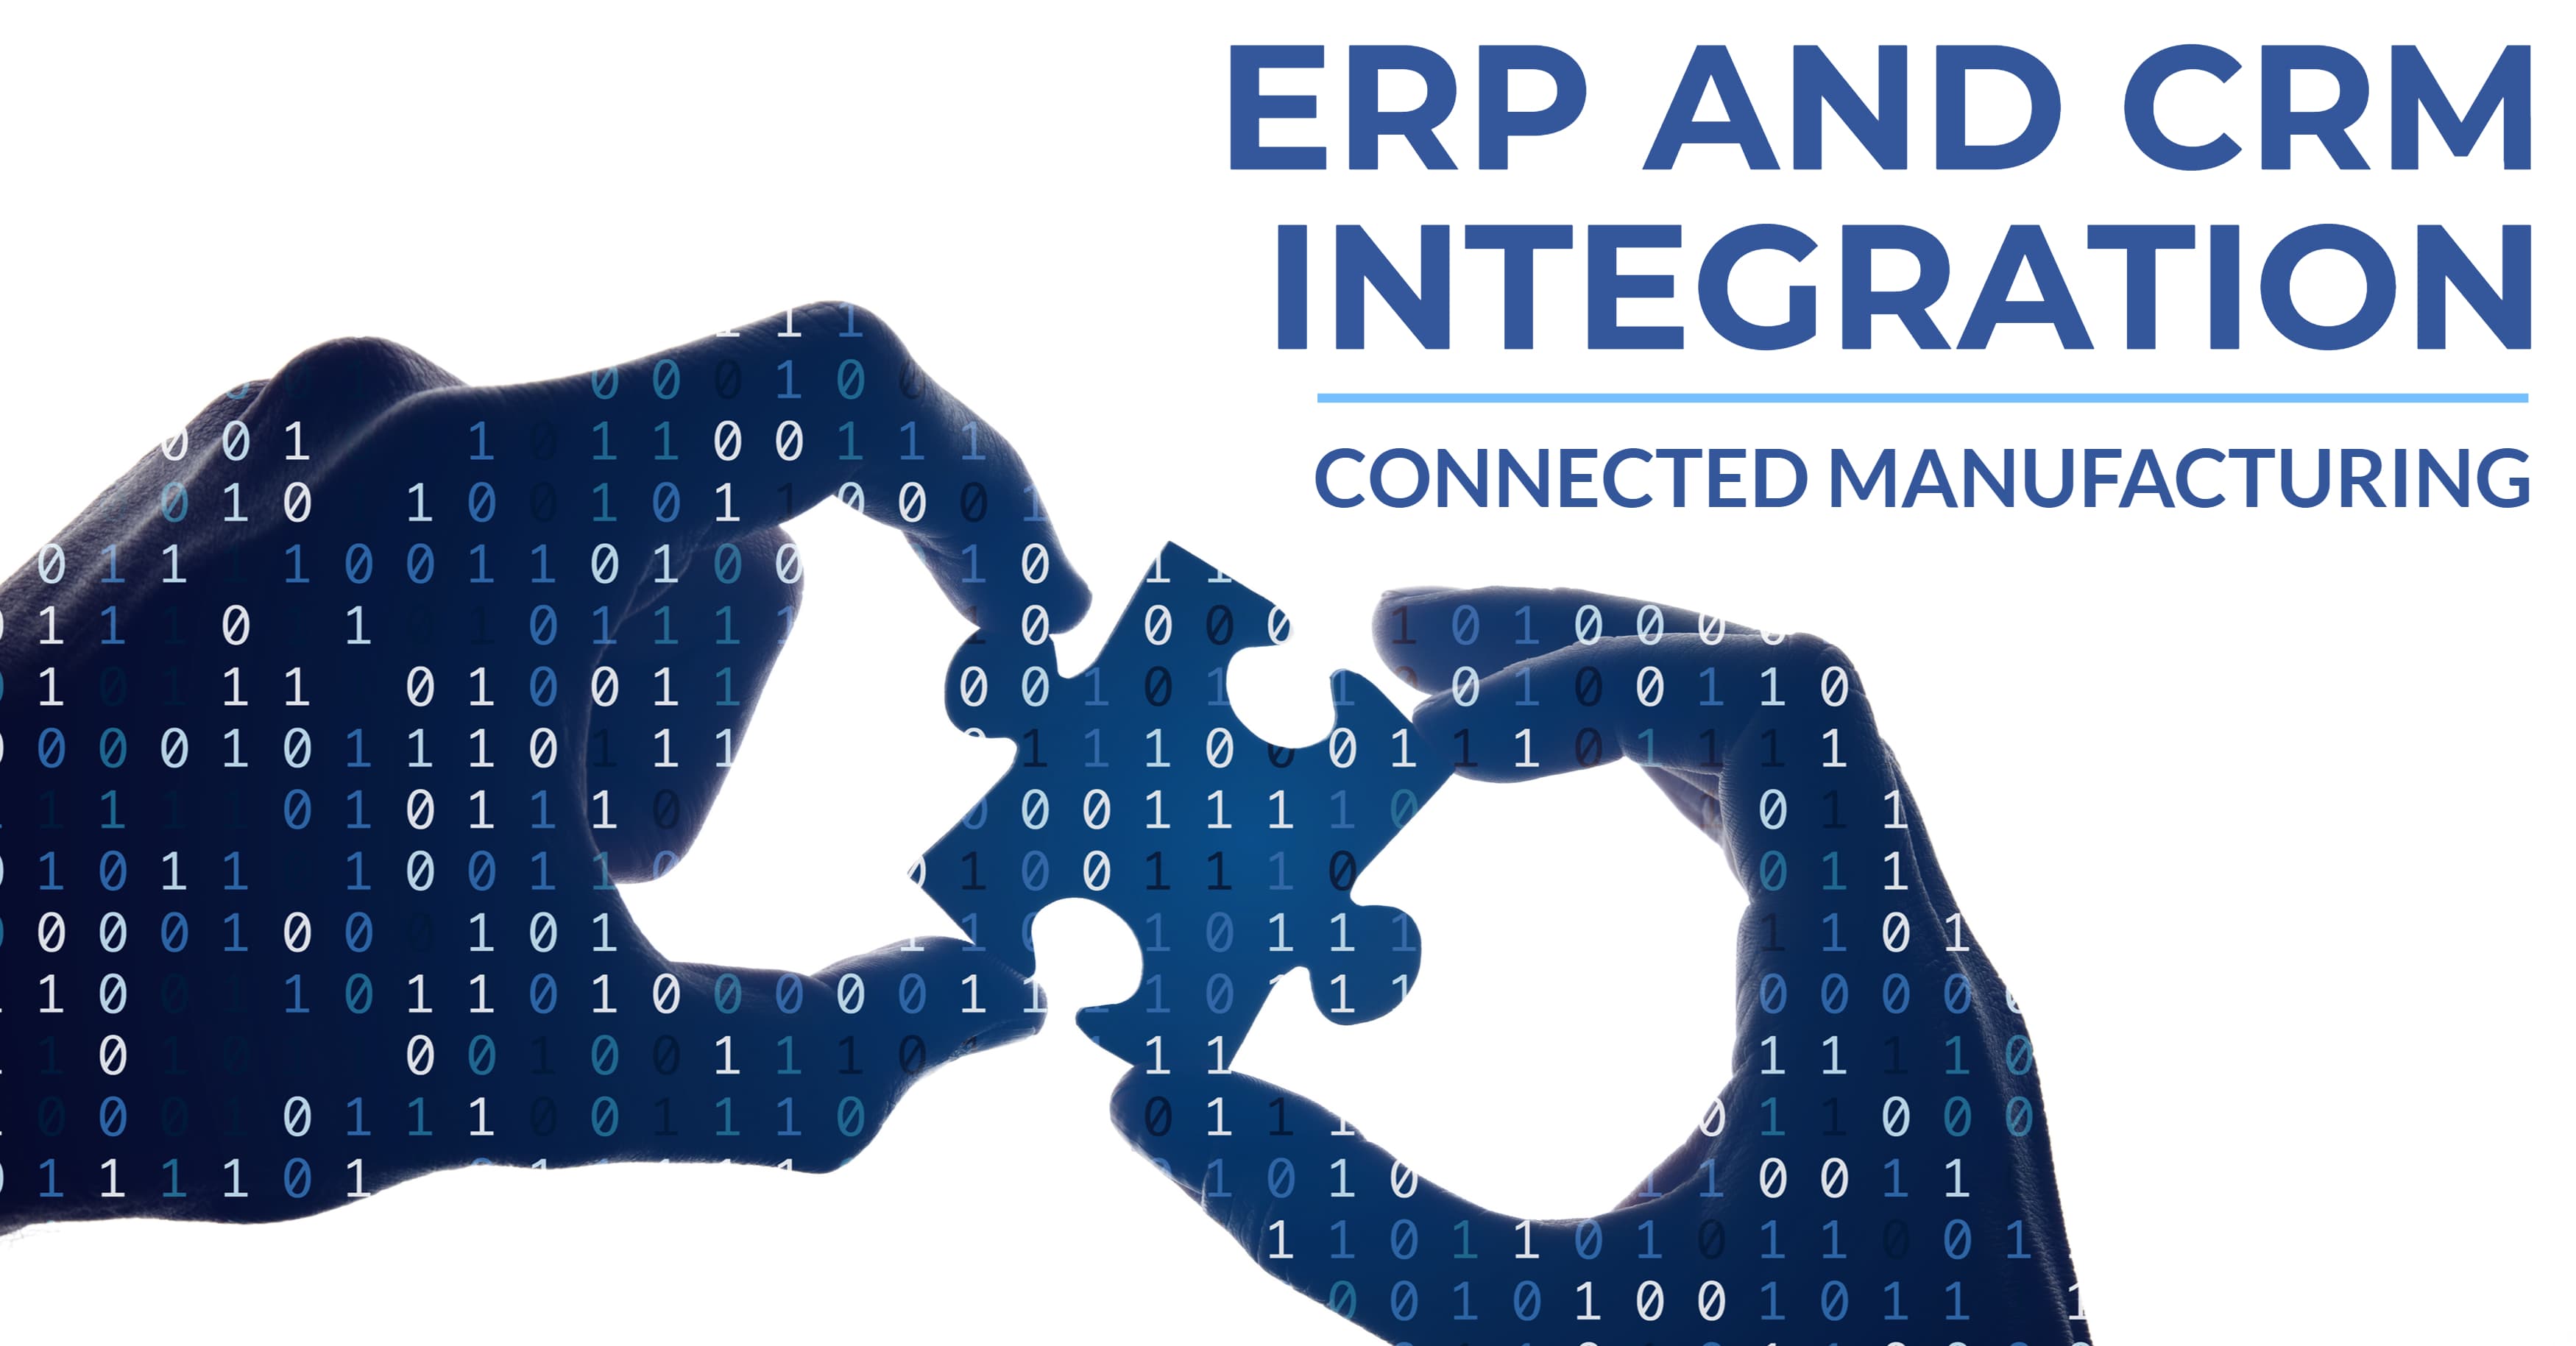 ERP CRM Integration Connected Manufacturing